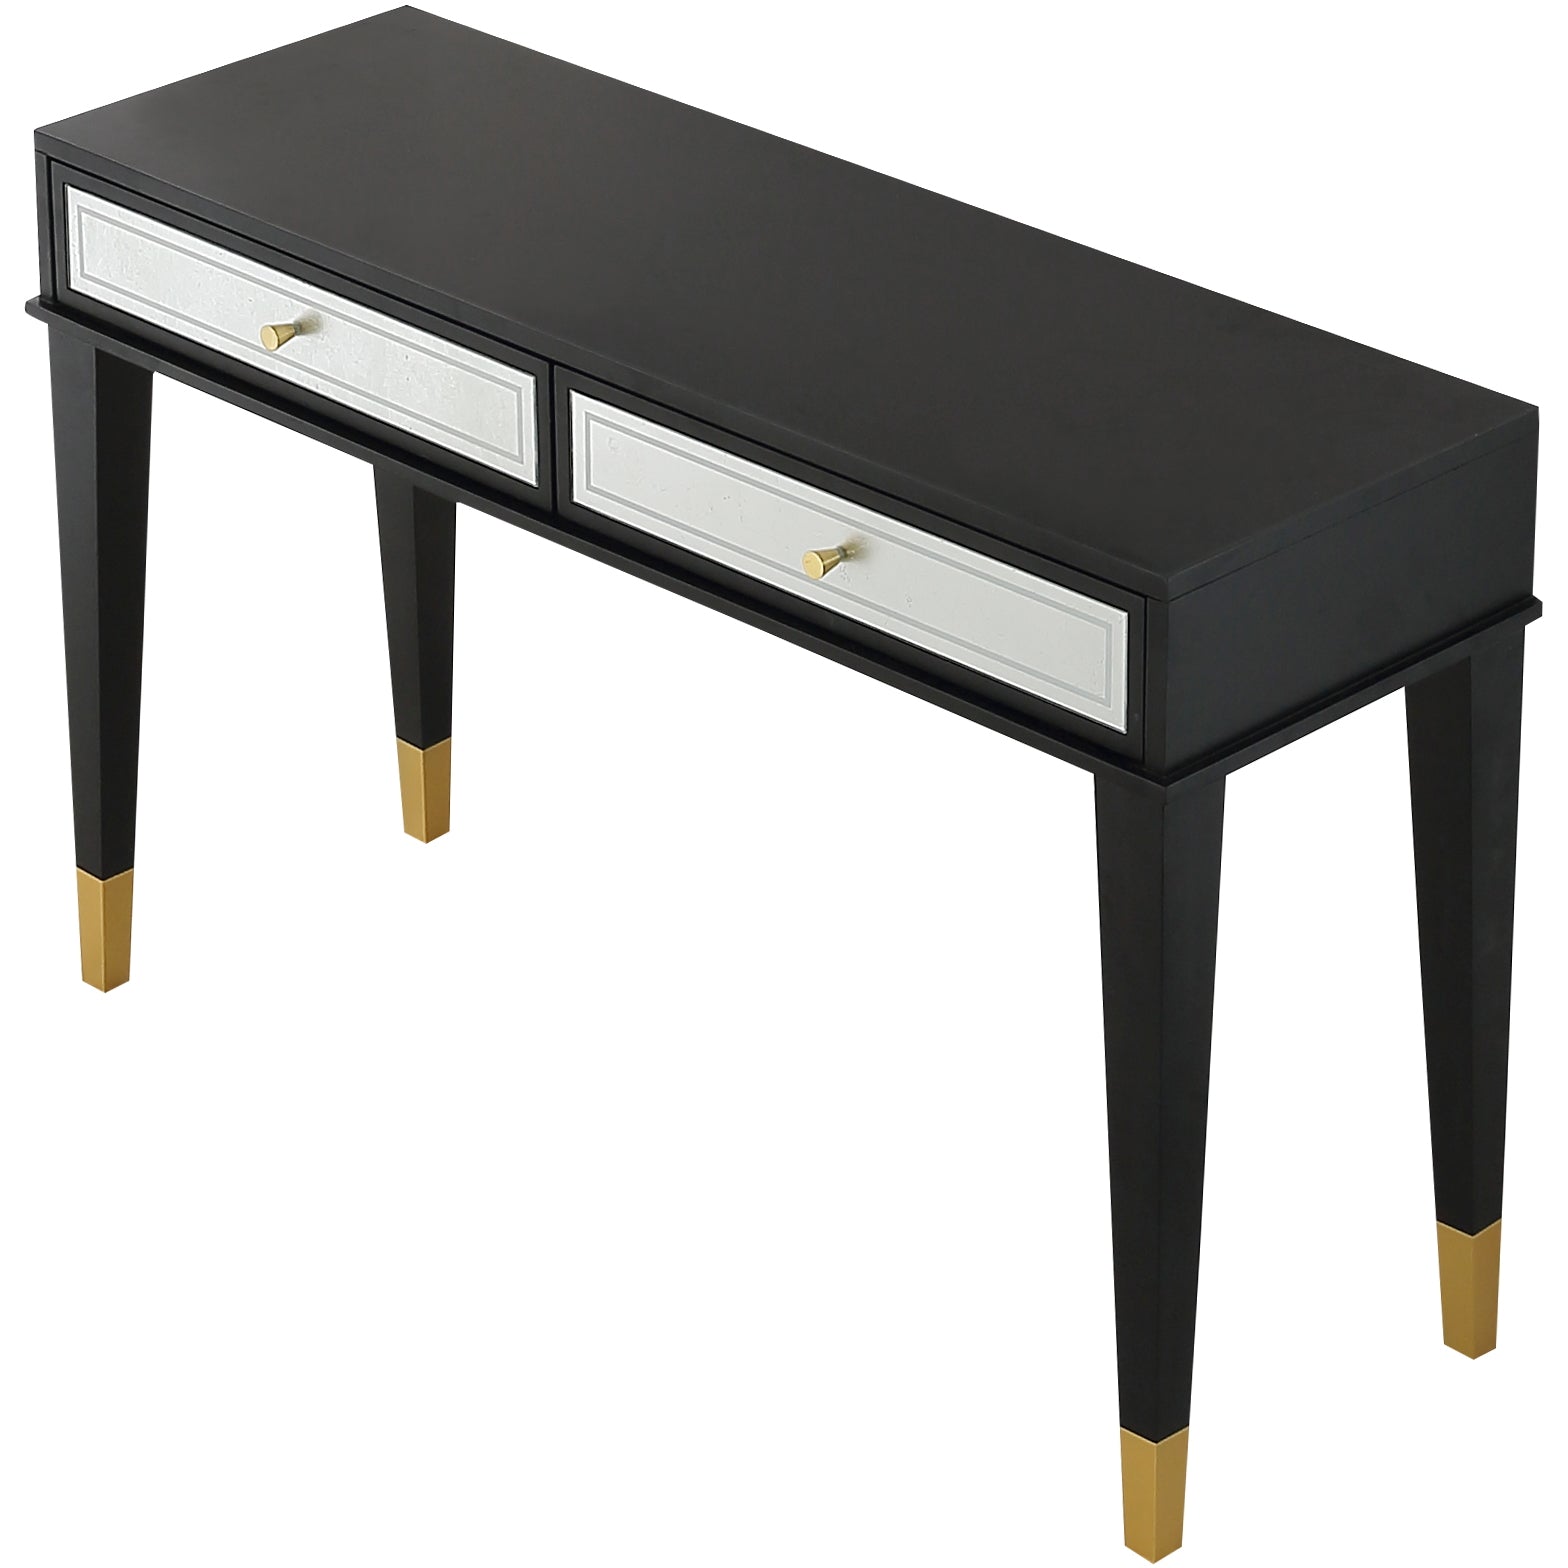 47" Black and Black and Gold Console Table With Storage